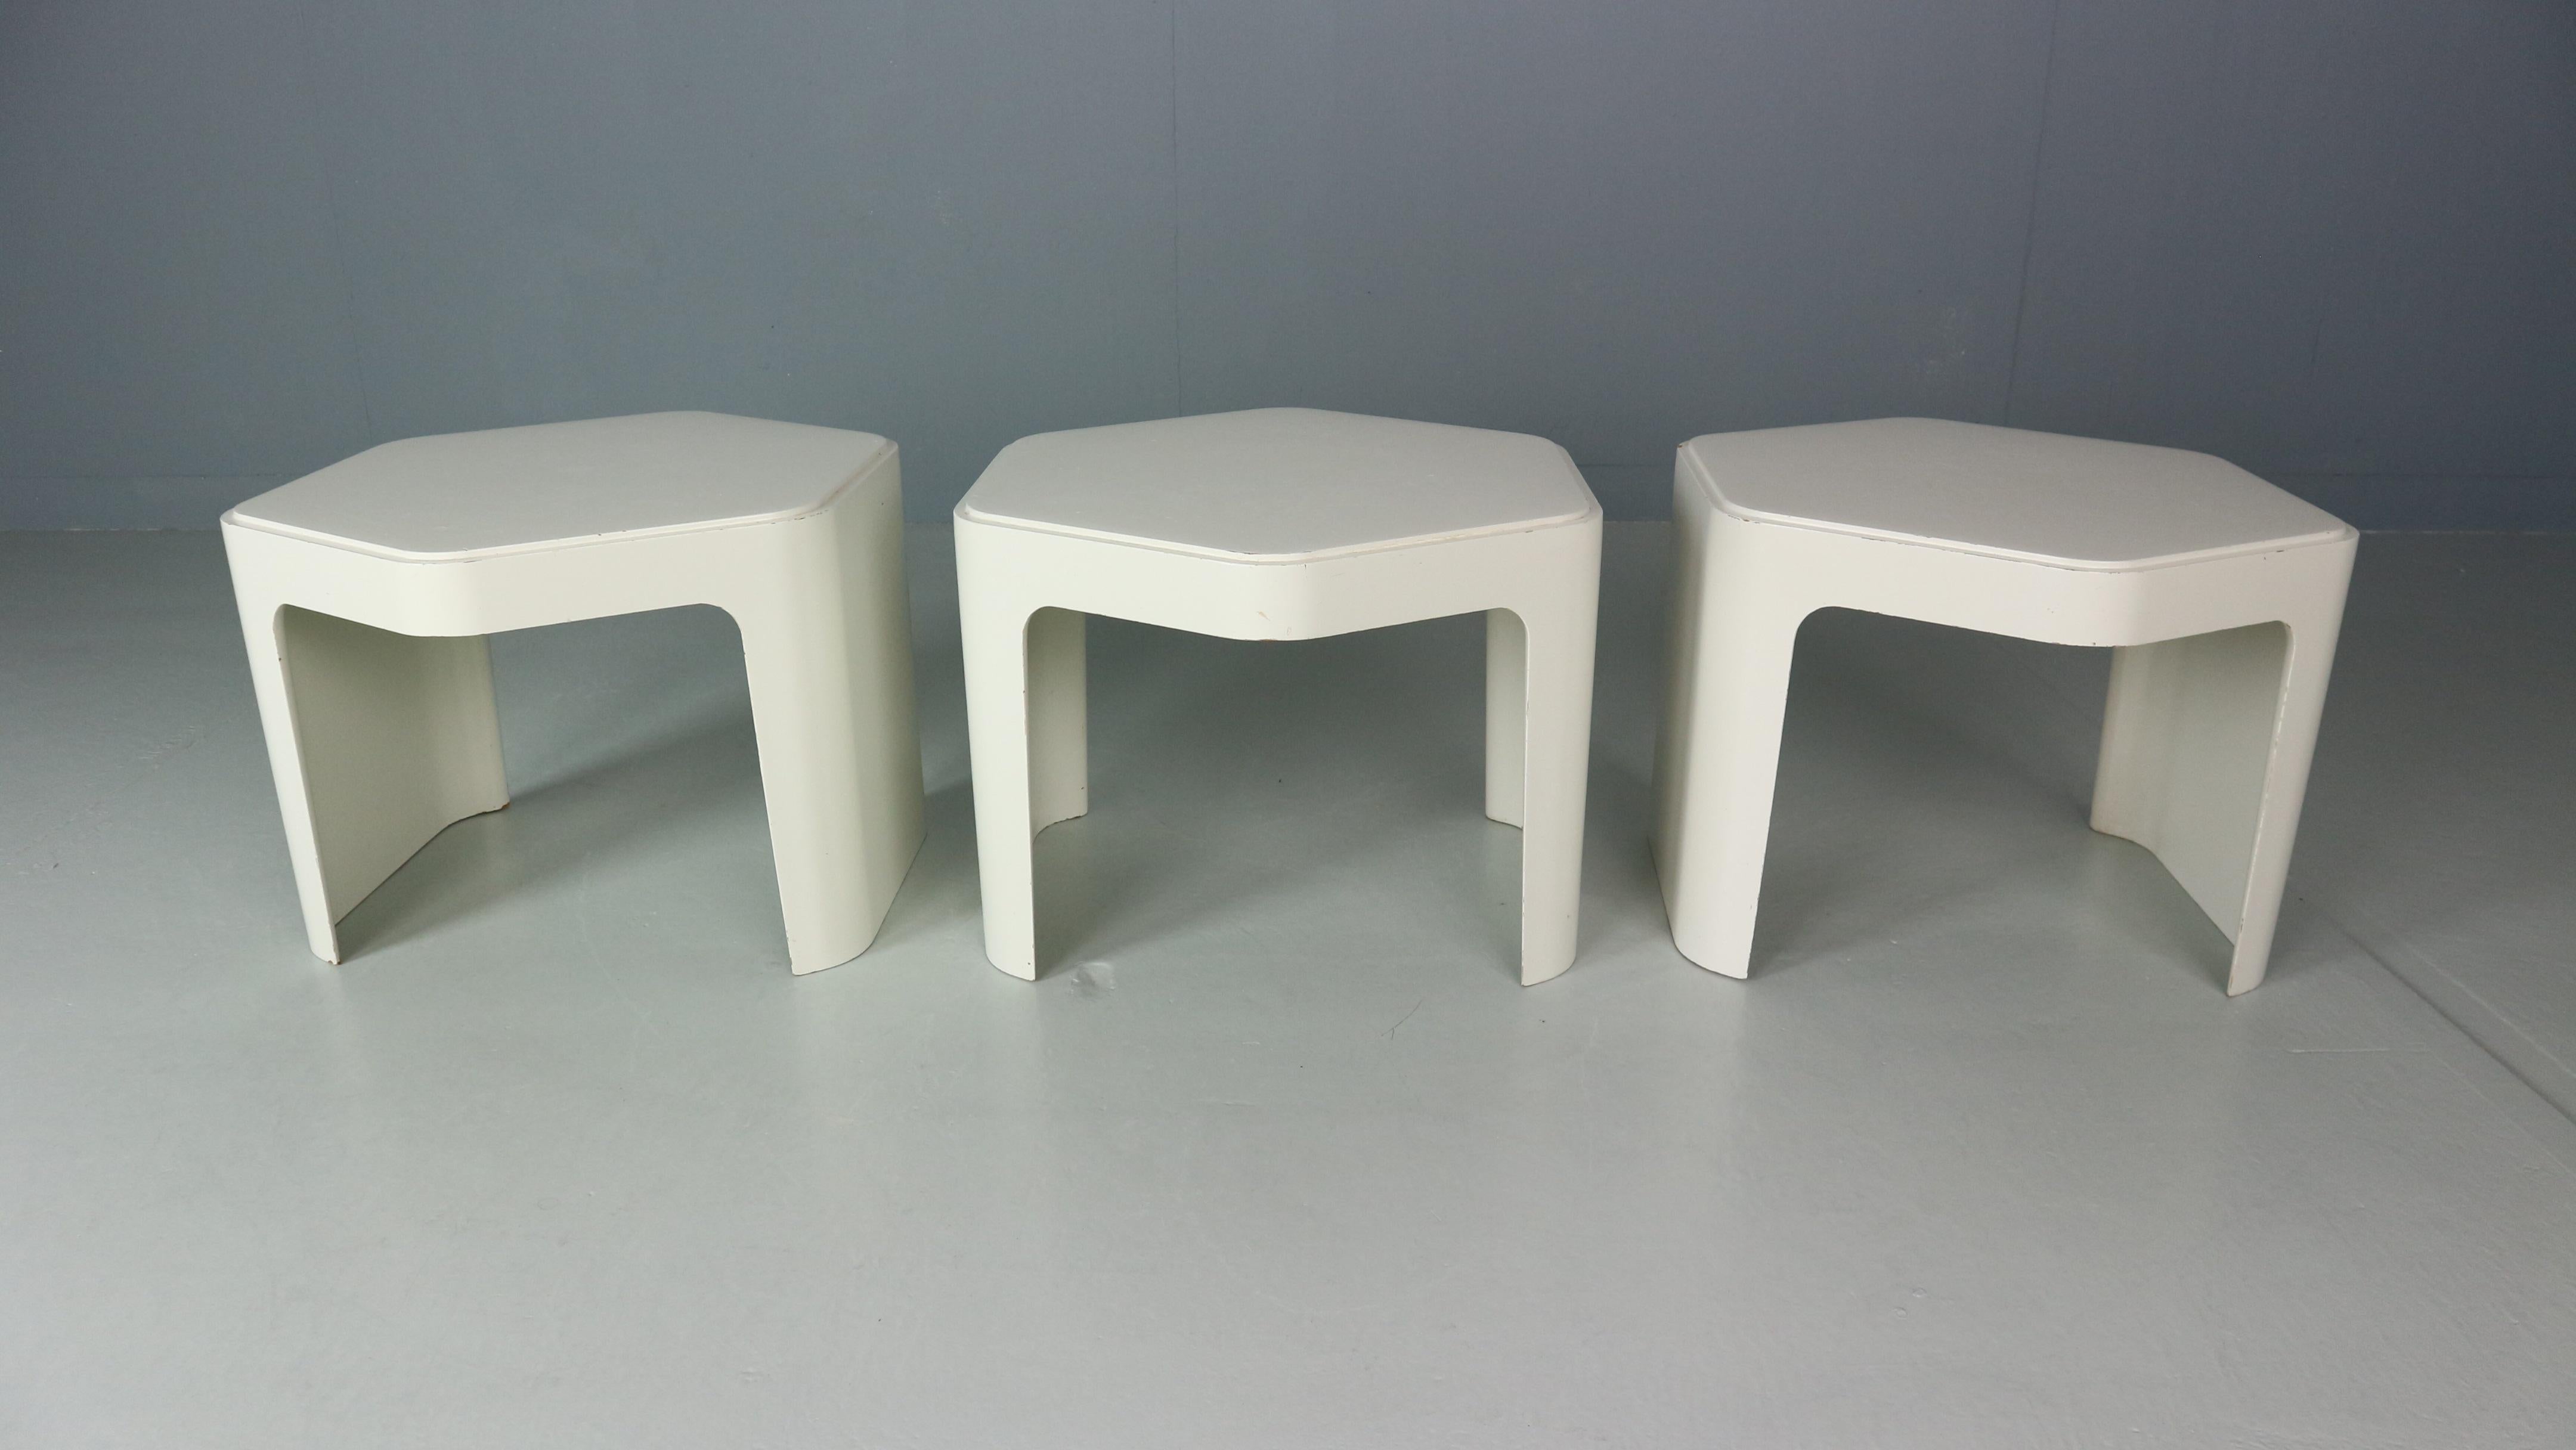 3x Hexagonal side tables by Peter Ghyzcy for Form + Life Collection, 1970. 3